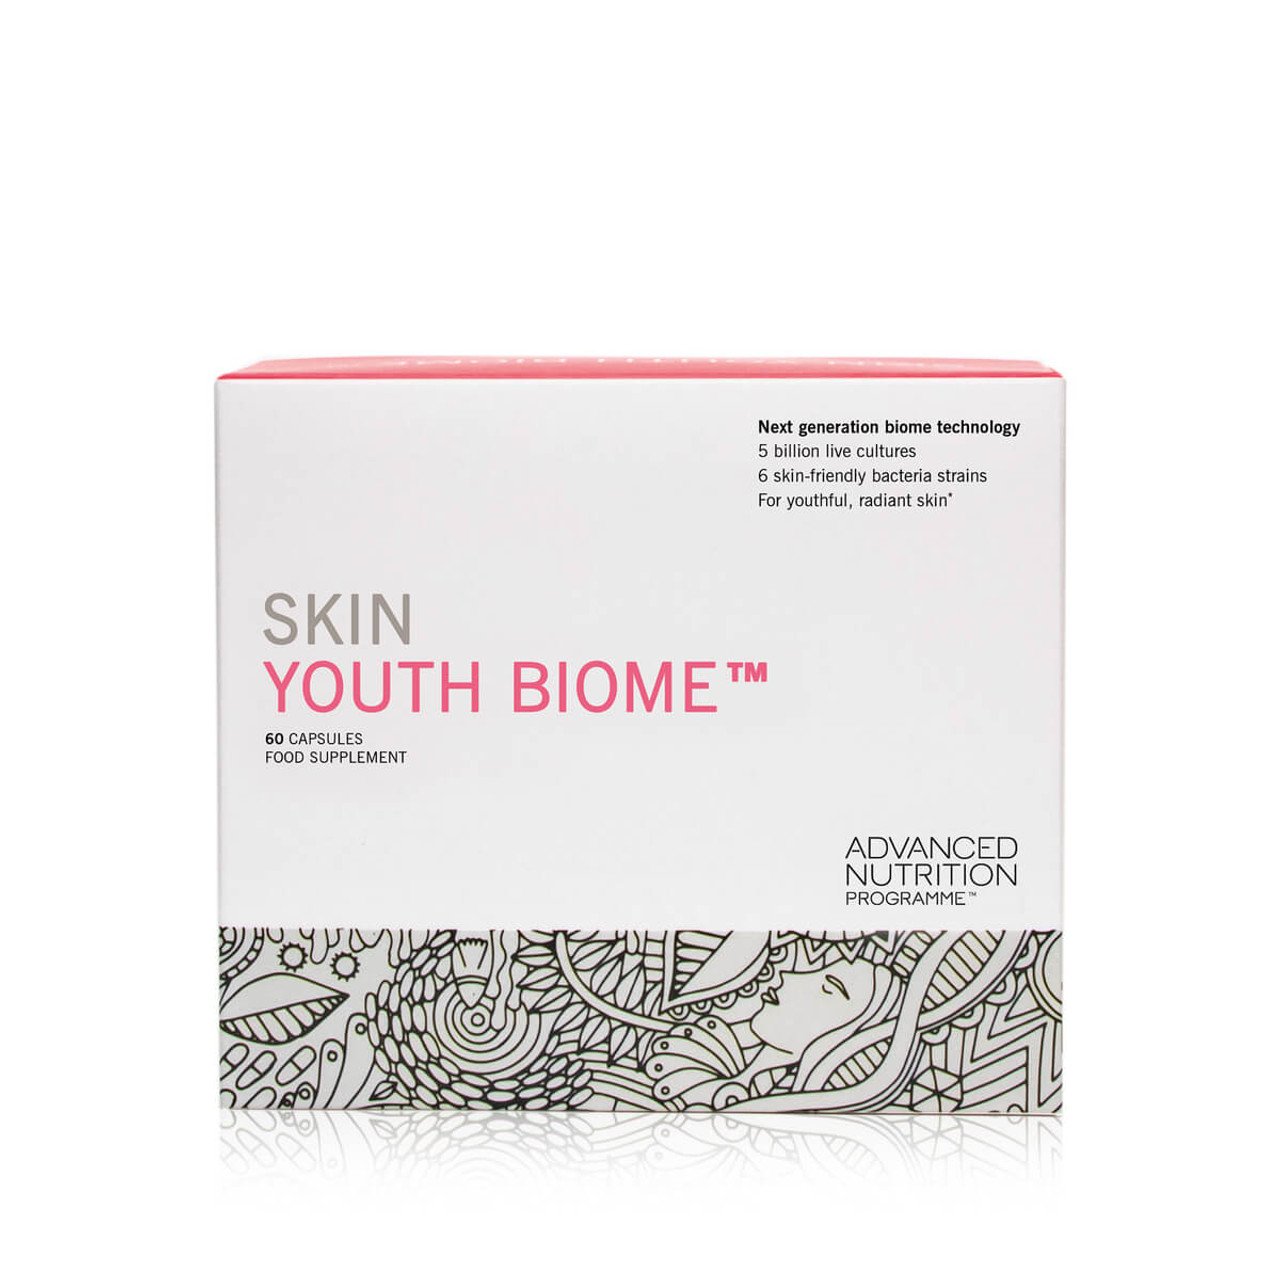 Advanced Nutrition Skin Youth Biome - 60 Capsules product image. 